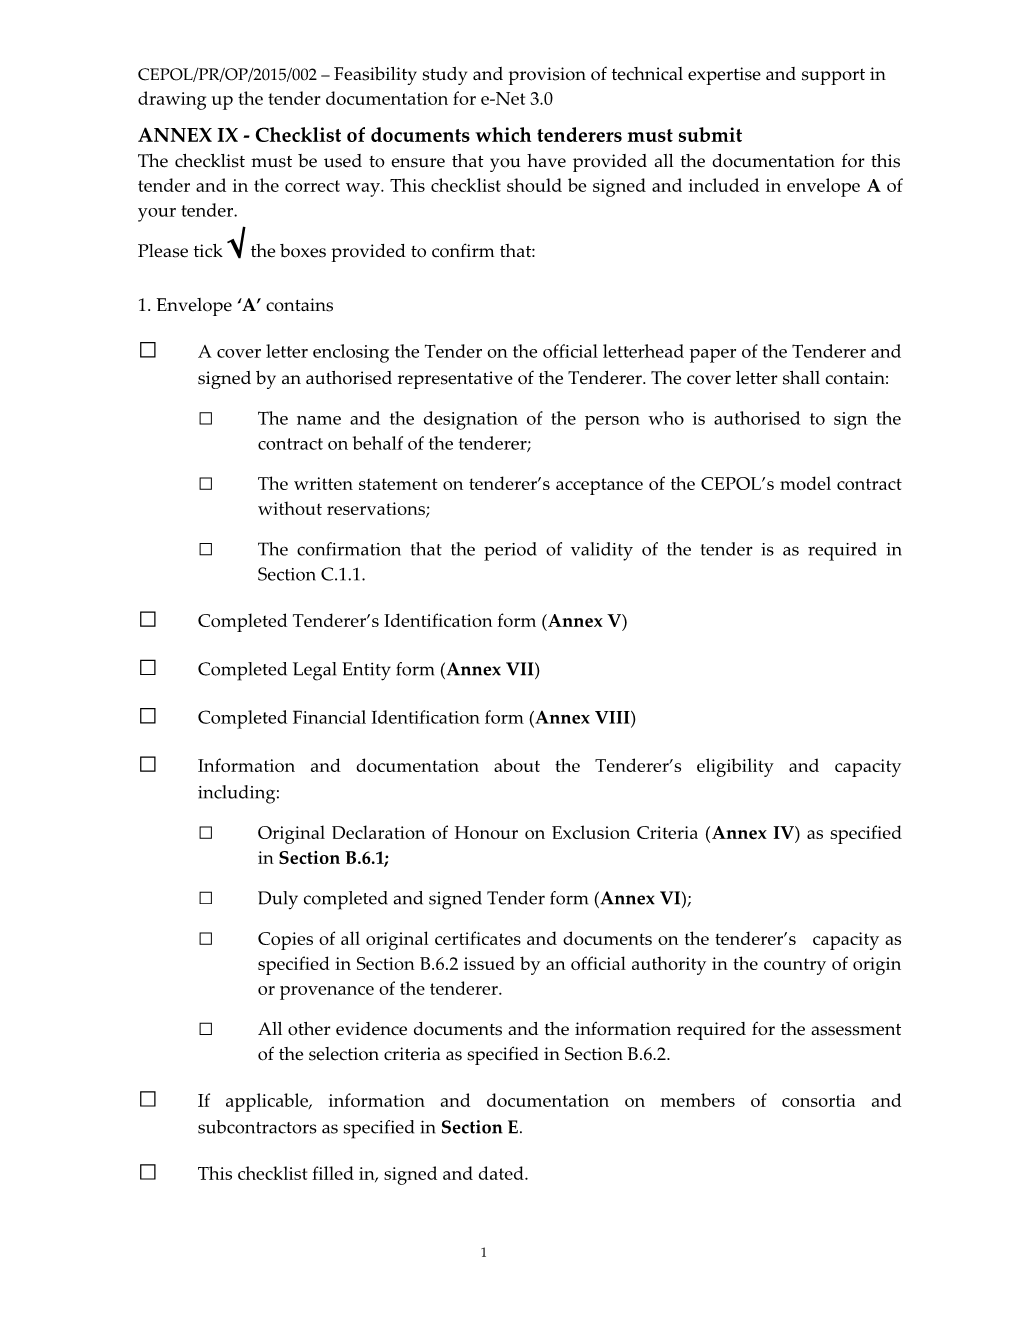 ANNEX II TECHNICAL PROPOSAL FORM (For Lot 1 Professional Support Staff)